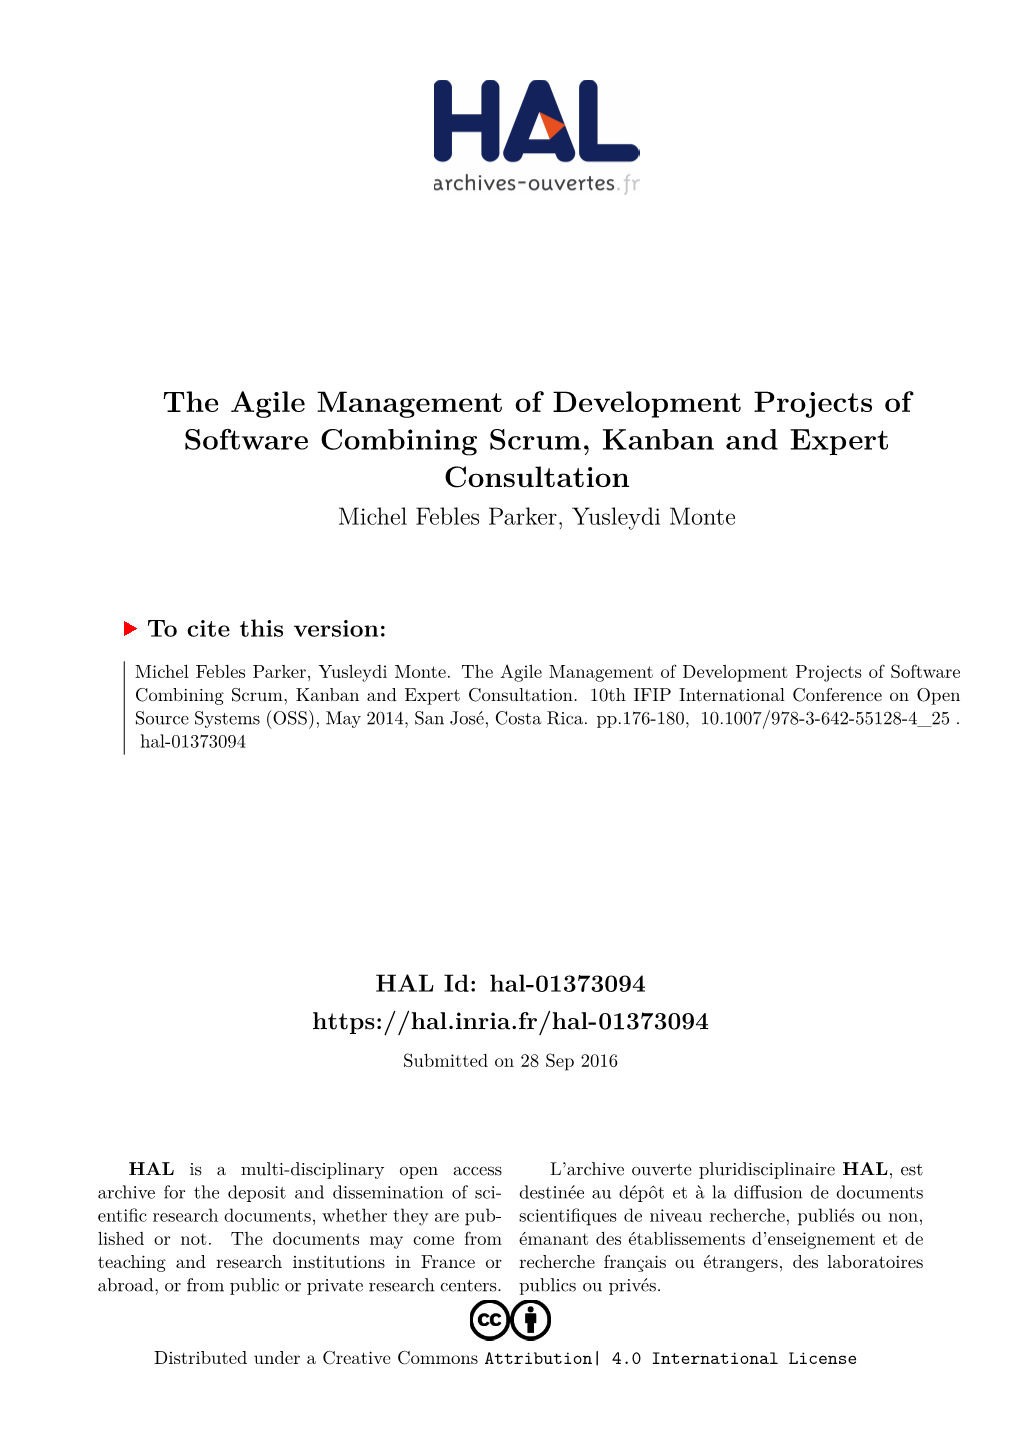 The Agile Management of Development Projects of Software Combining Scrum, Kanban and Expert Consultation Michel Febles Parker, Yusleydi Monte